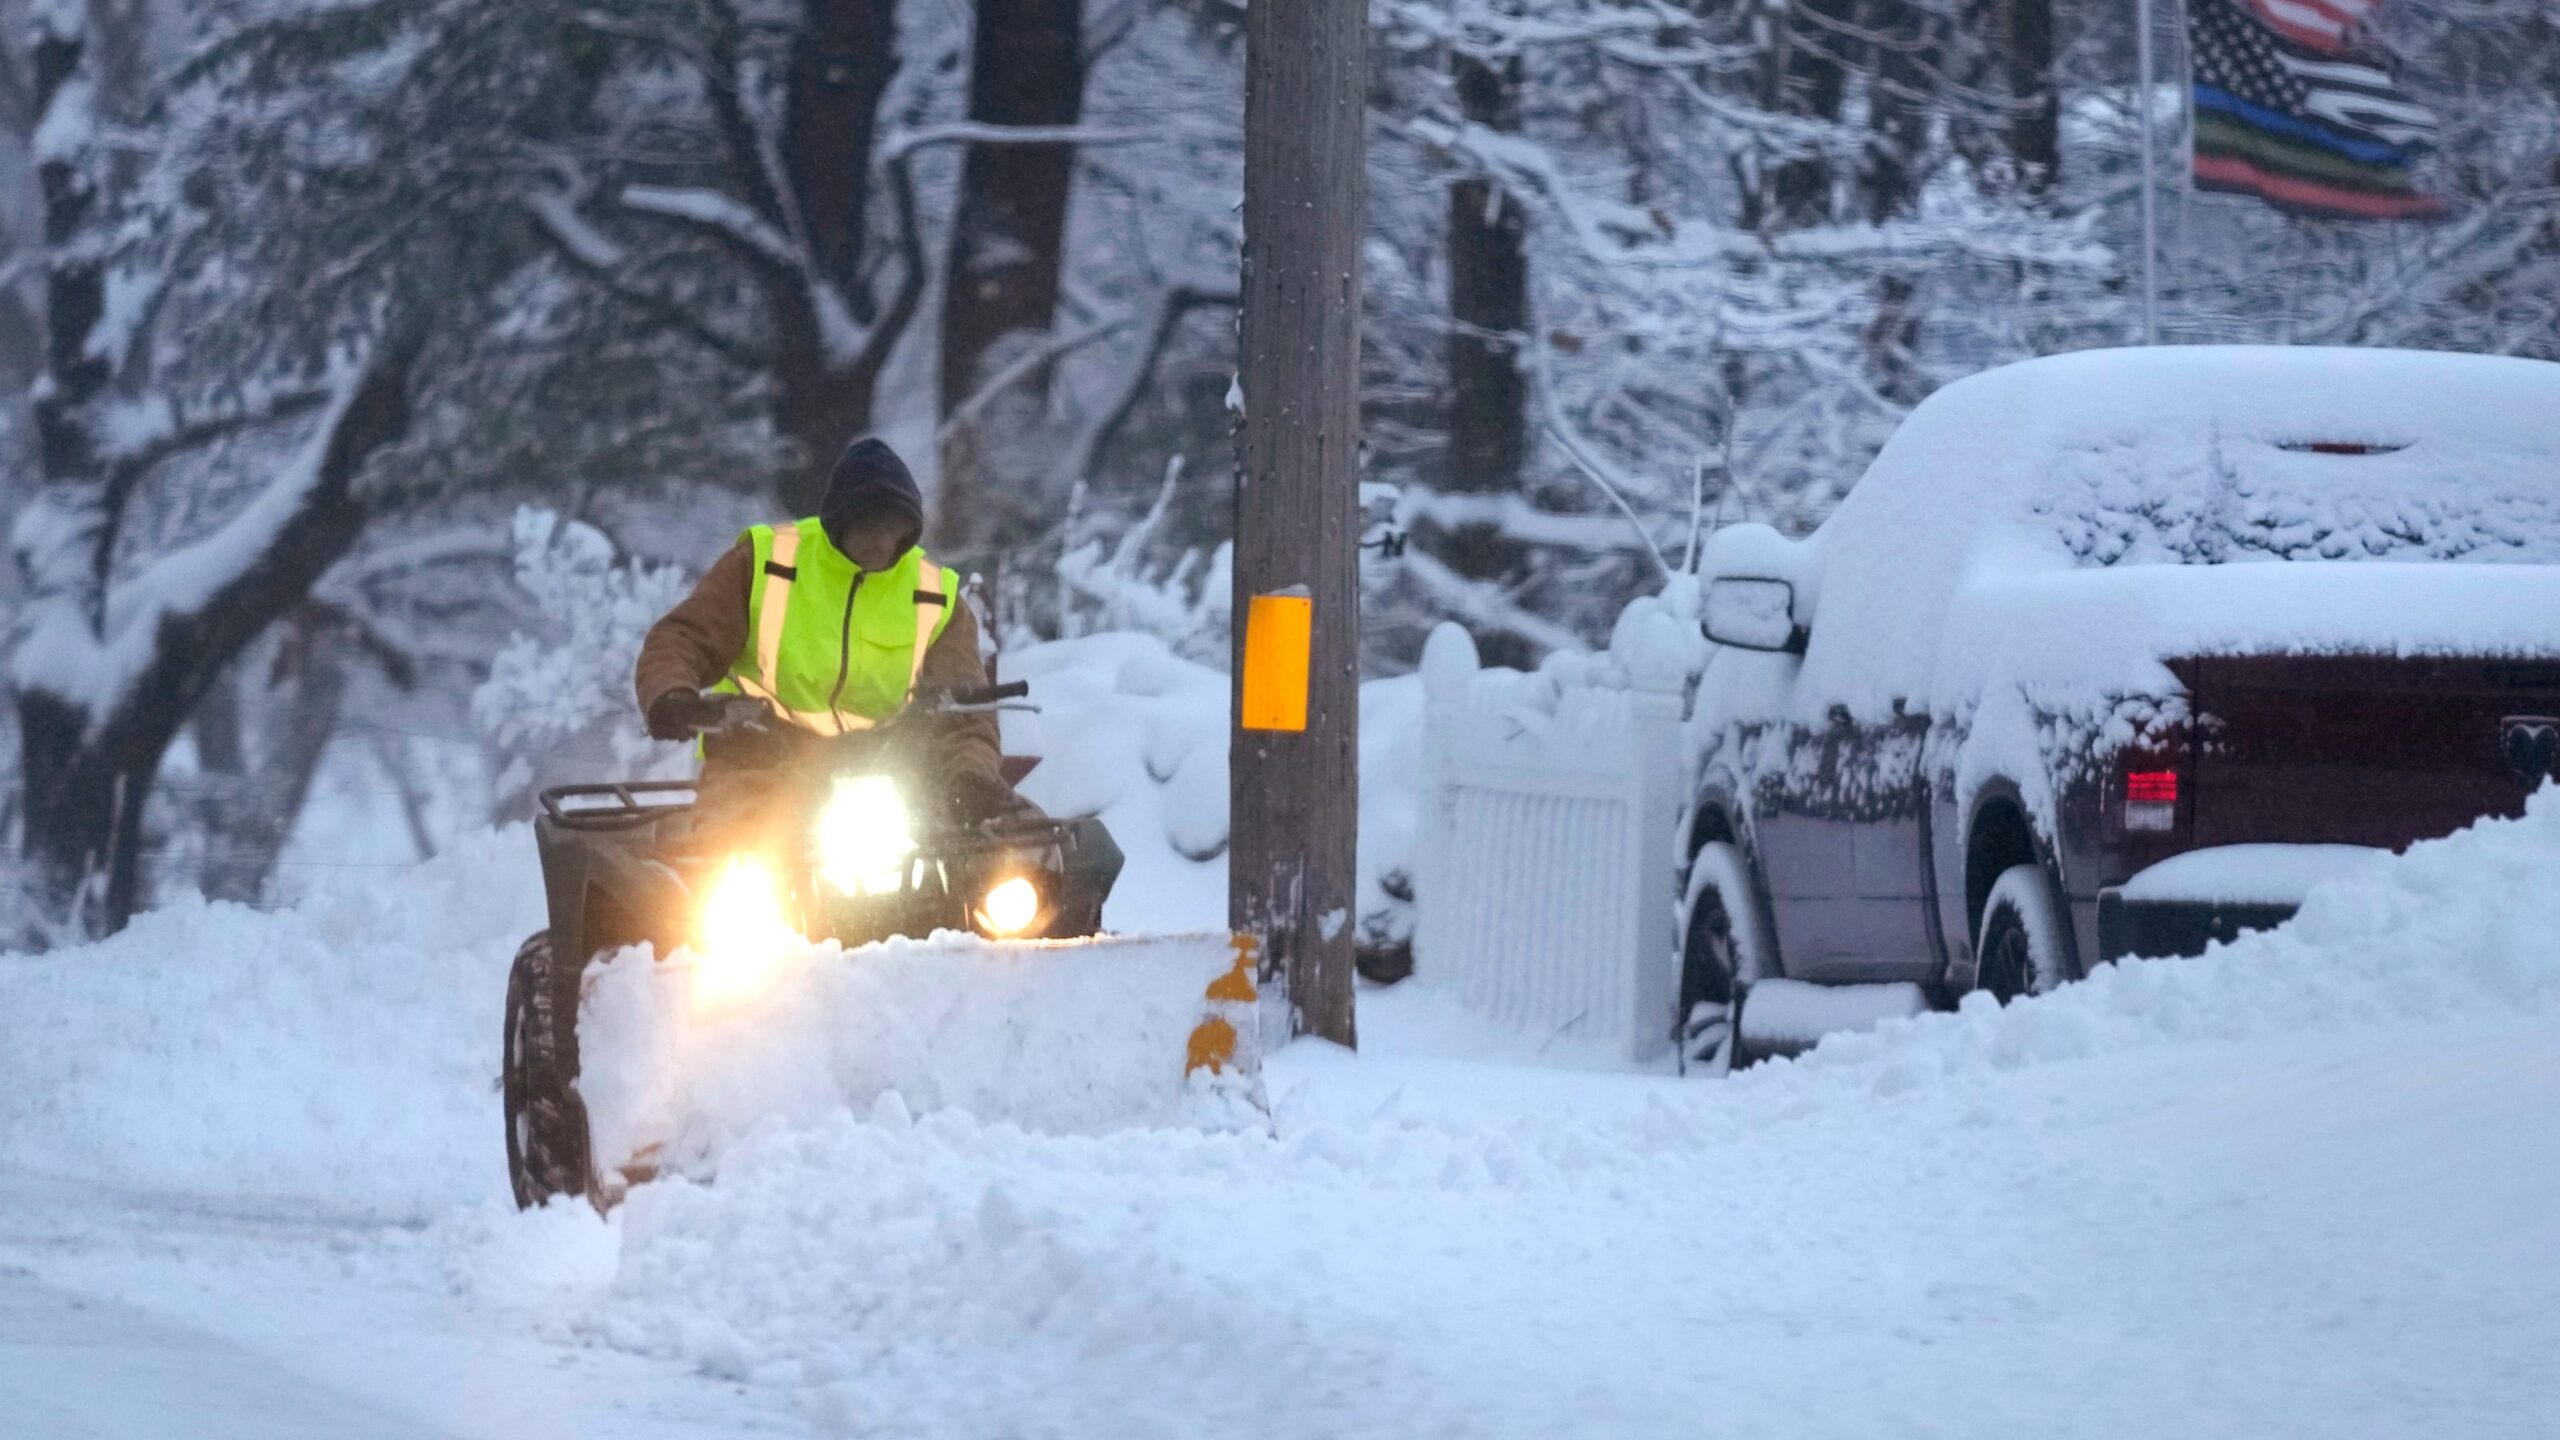 Winter storm headed for Michigan could bring up to 8 inches of snow